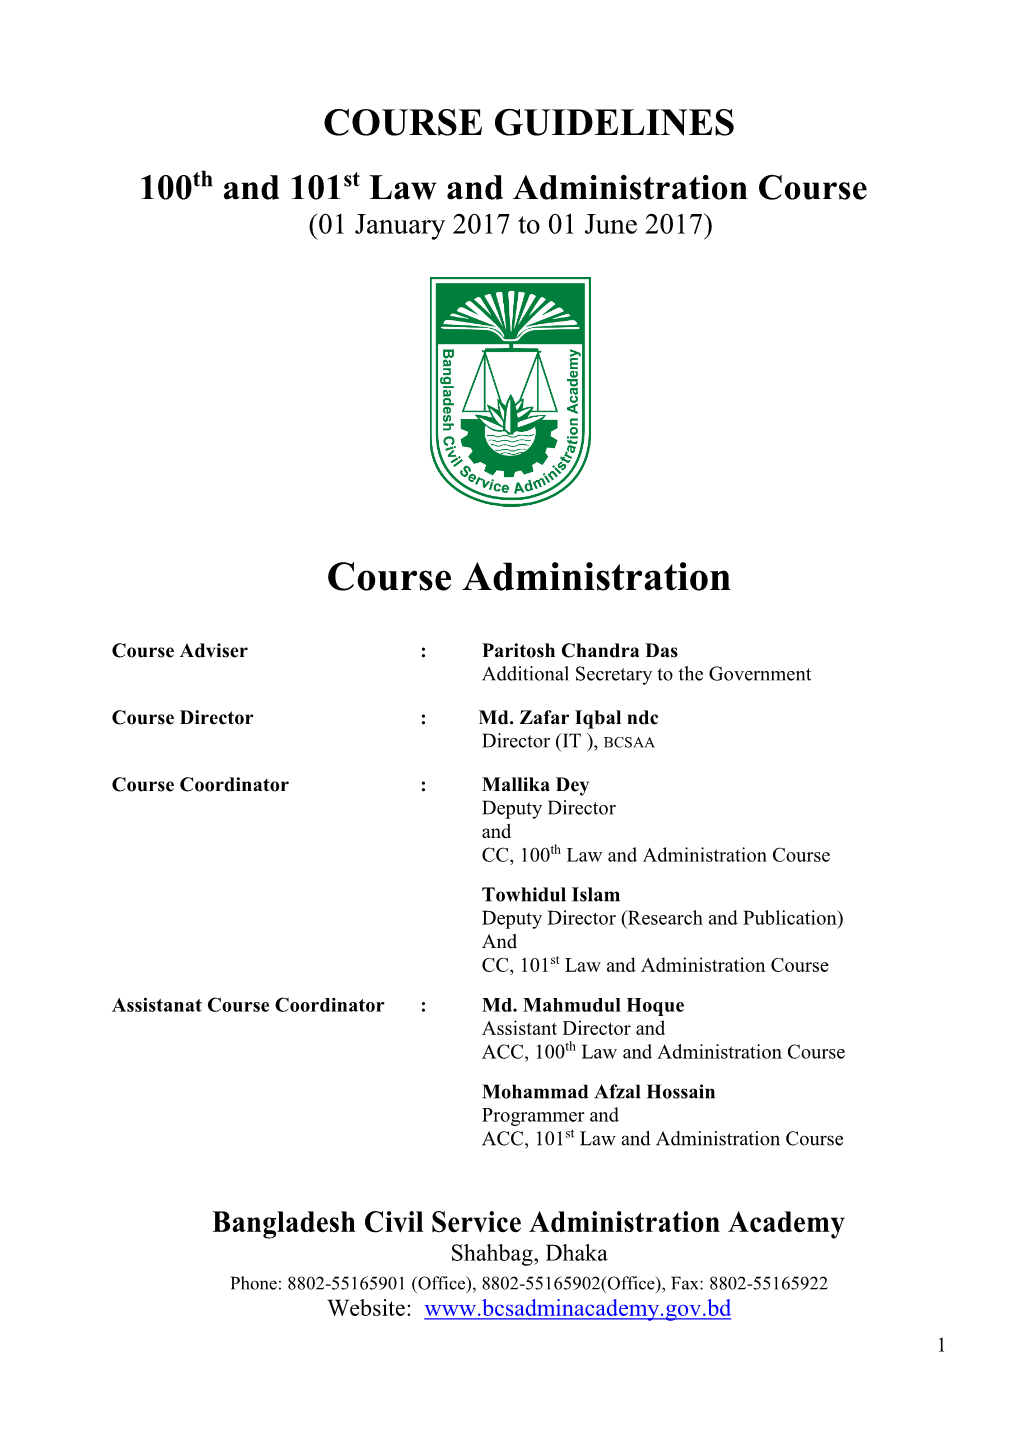 100Th and 101St Law and Administration Course (01 January 2017 to 01 June 2017)